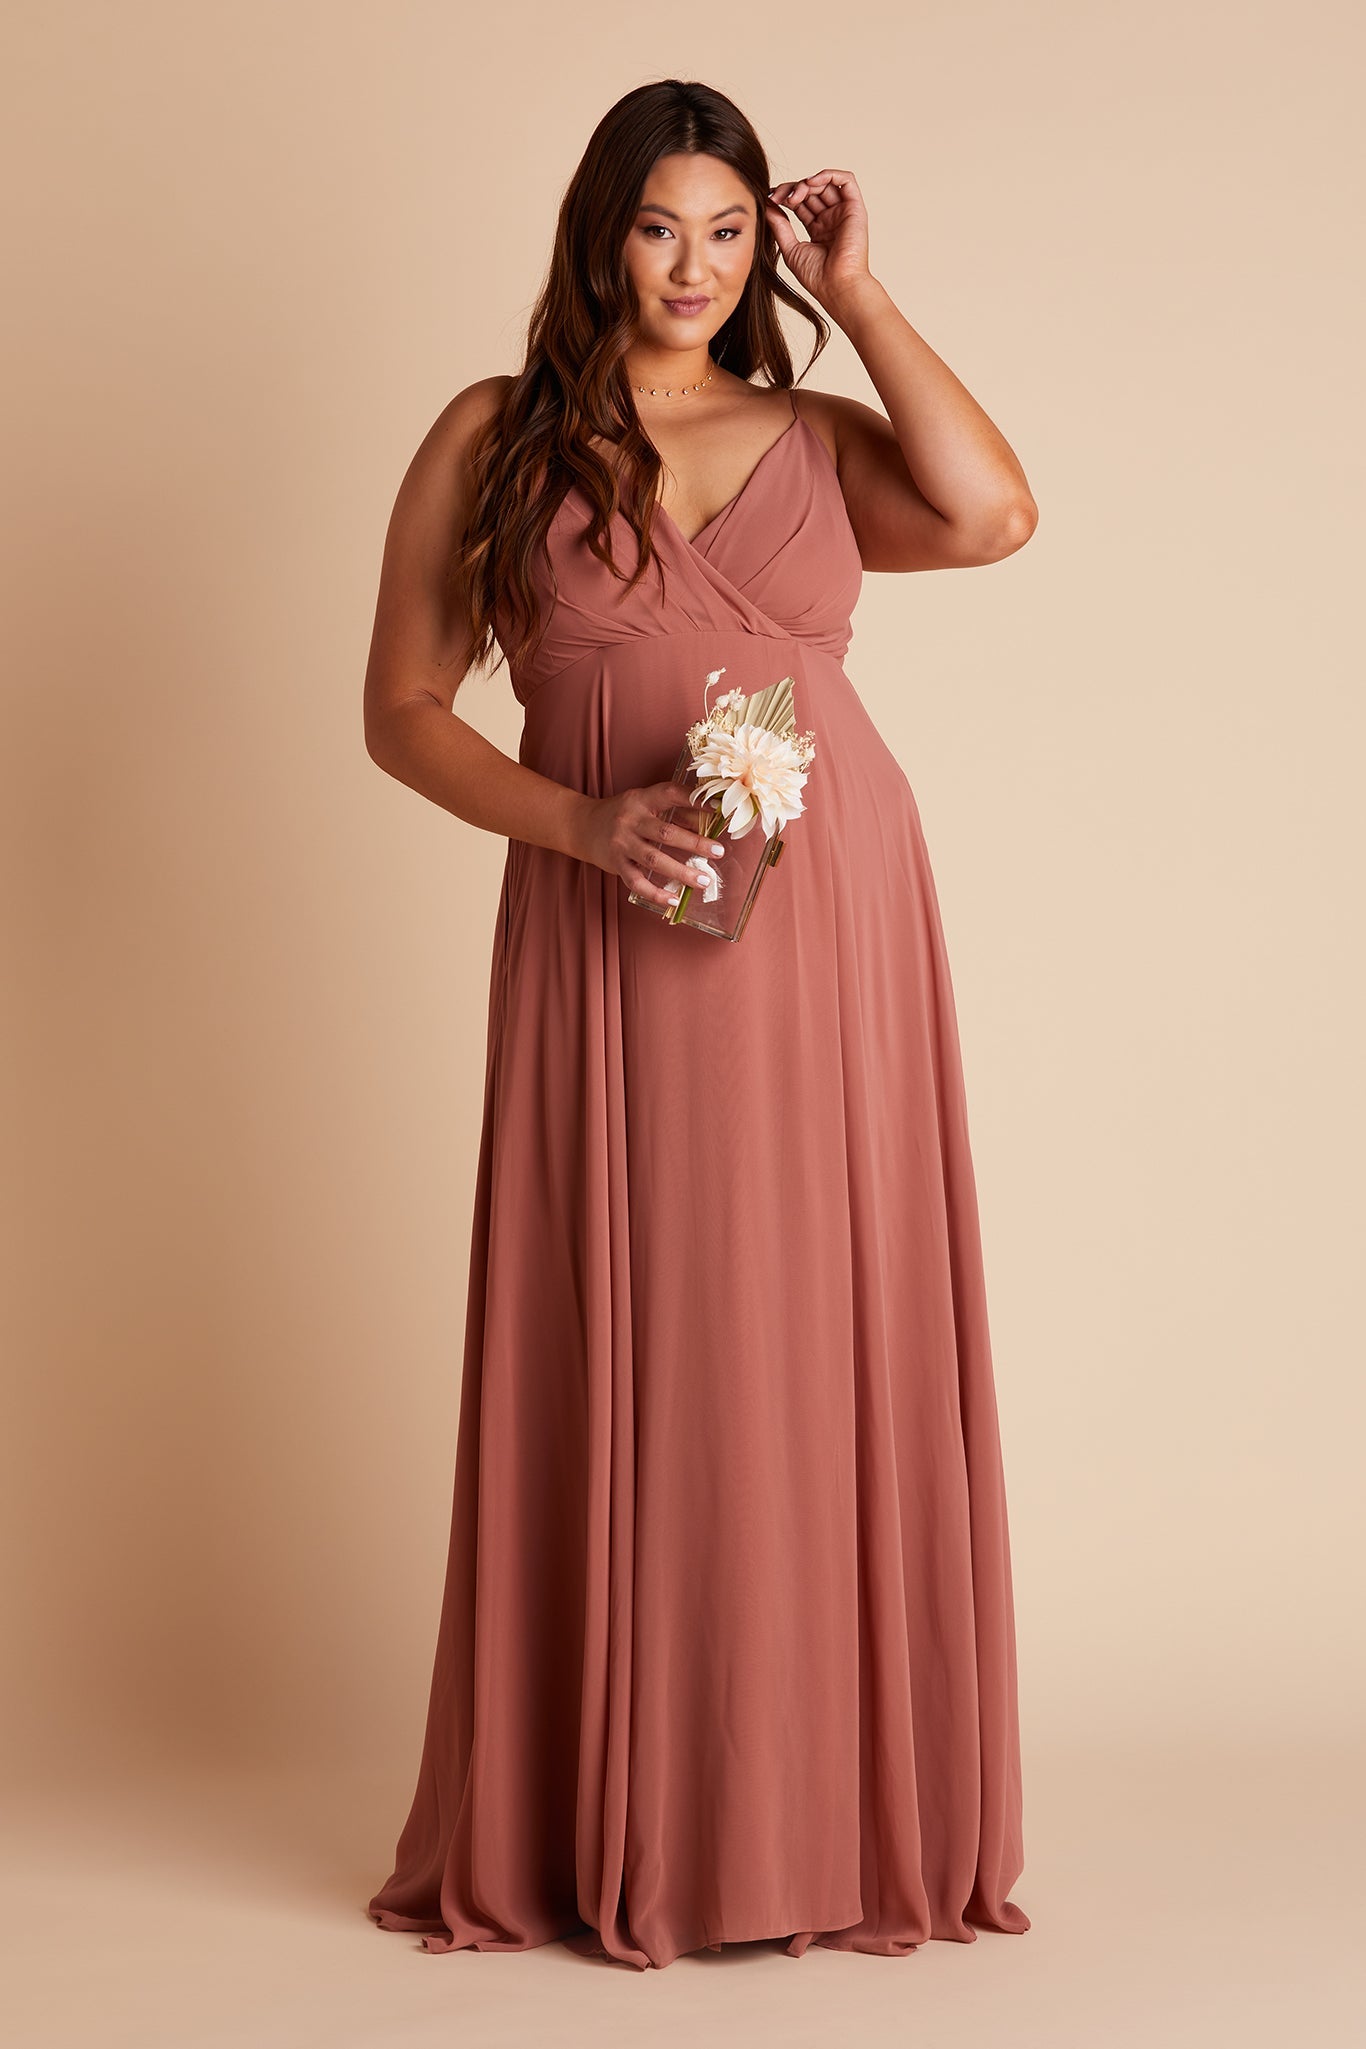 Kaia plus size bridesmaids dress in desert rose chiffon by Birdy Grey, front view